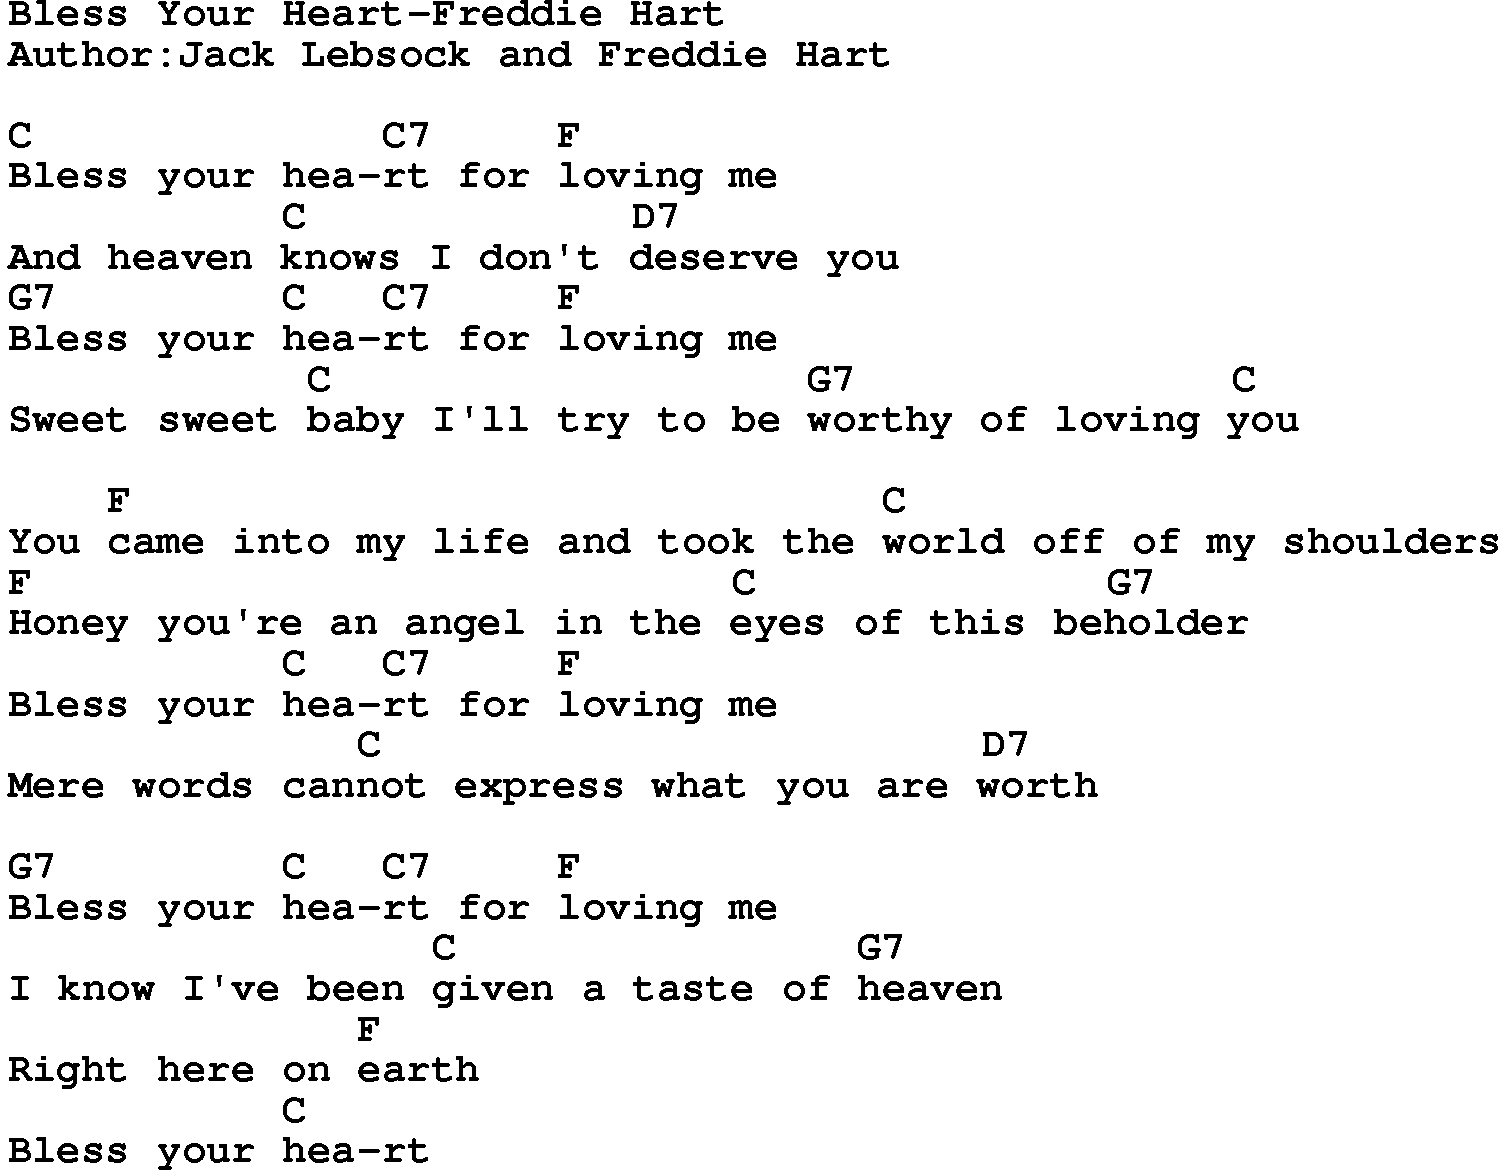 Country music song: Bless Your Heart-Freddie Hart lyrics and chords